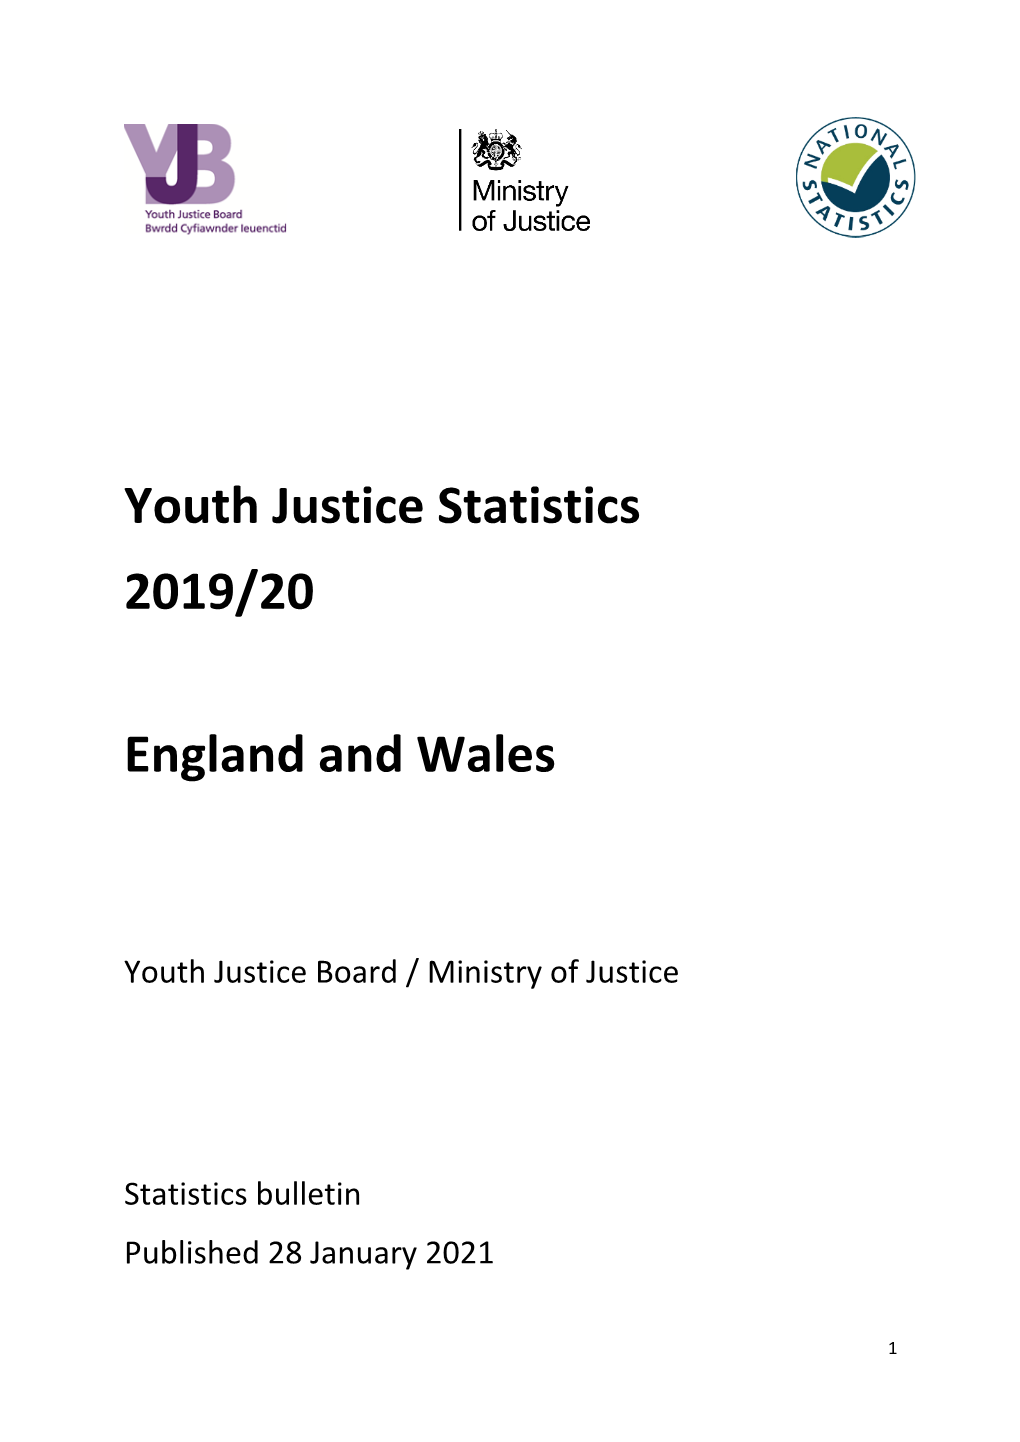 Youth Justice Statistics, England and Wales, April 2019 to March 2020